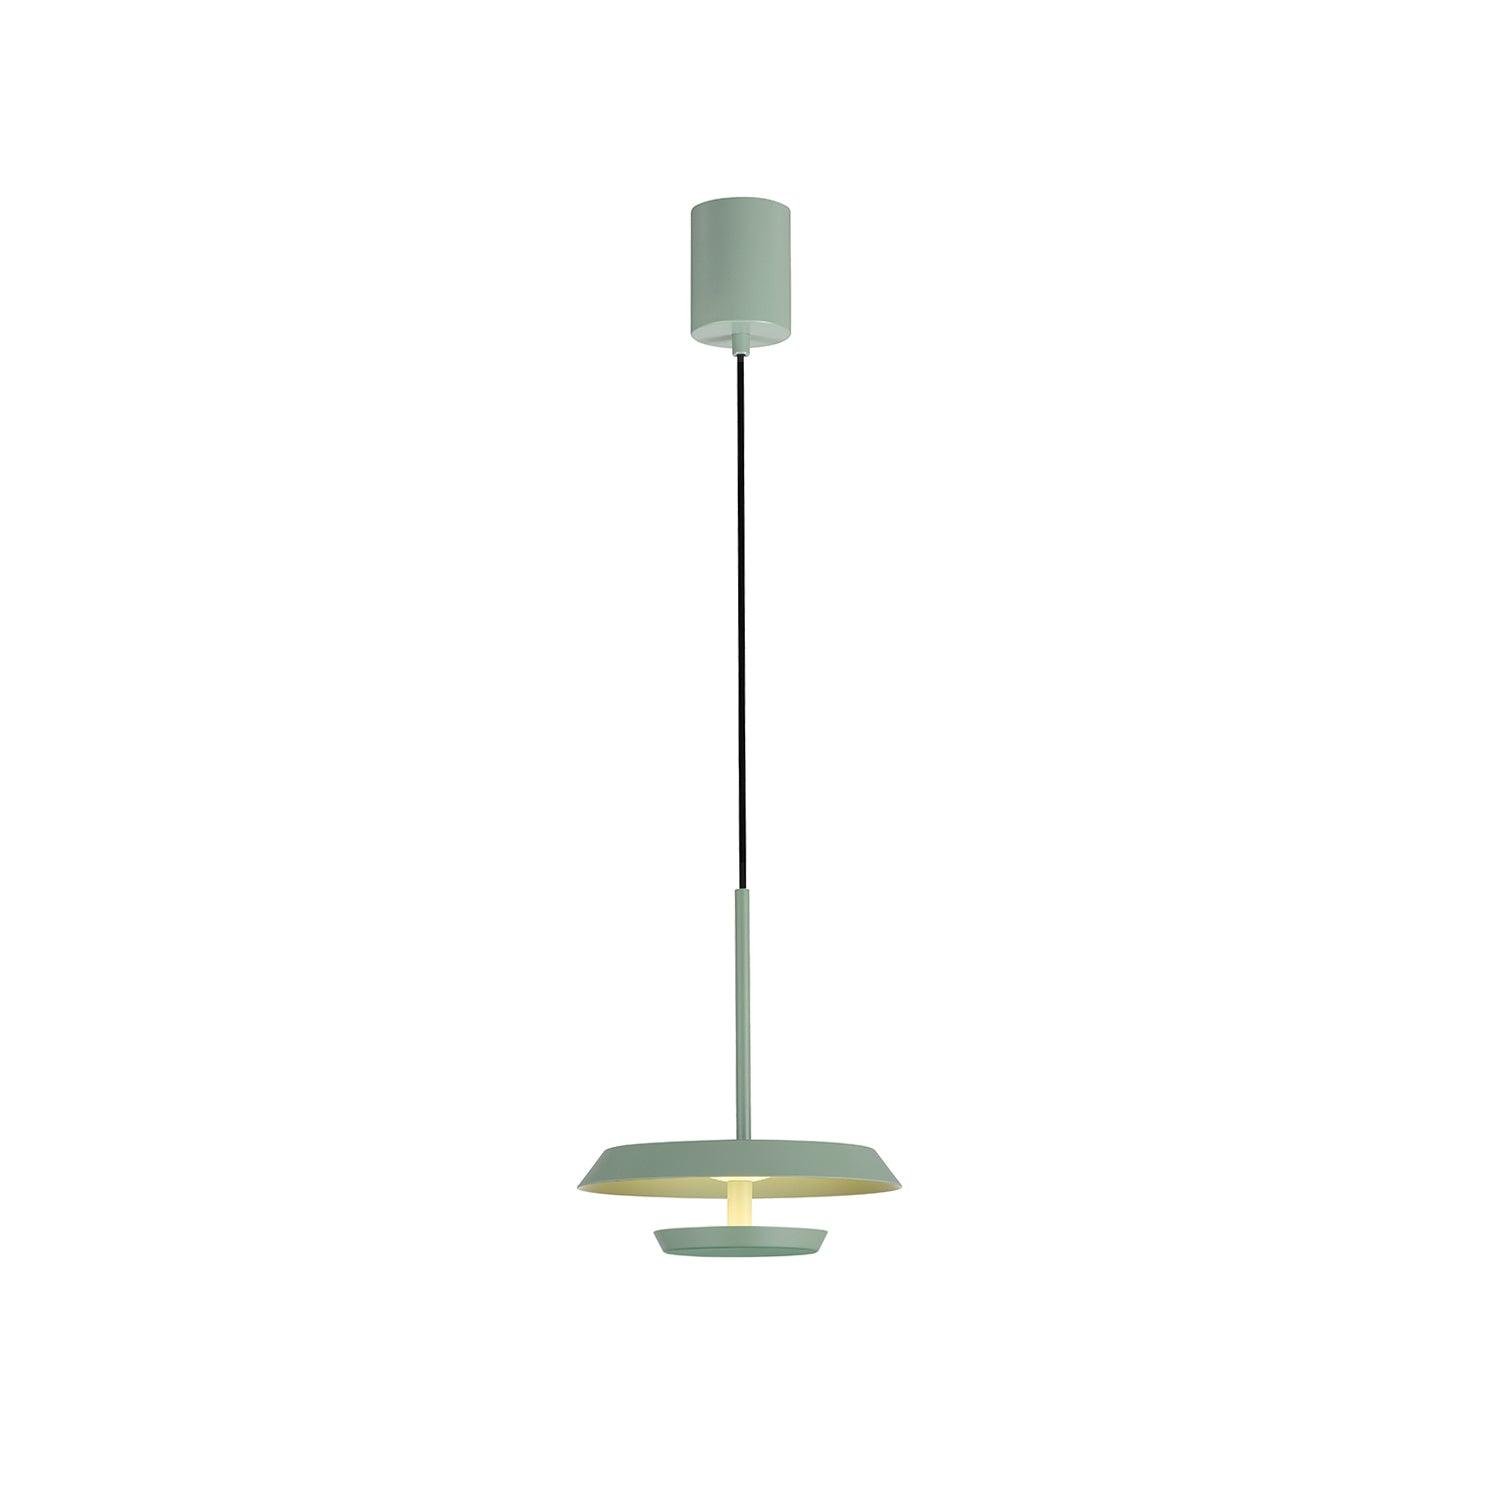 Green Flat Pendant Light, measuring 9.8 inches in diameter and 10.4 inches in height (25cm x 26.5cm), emitting a cool light.